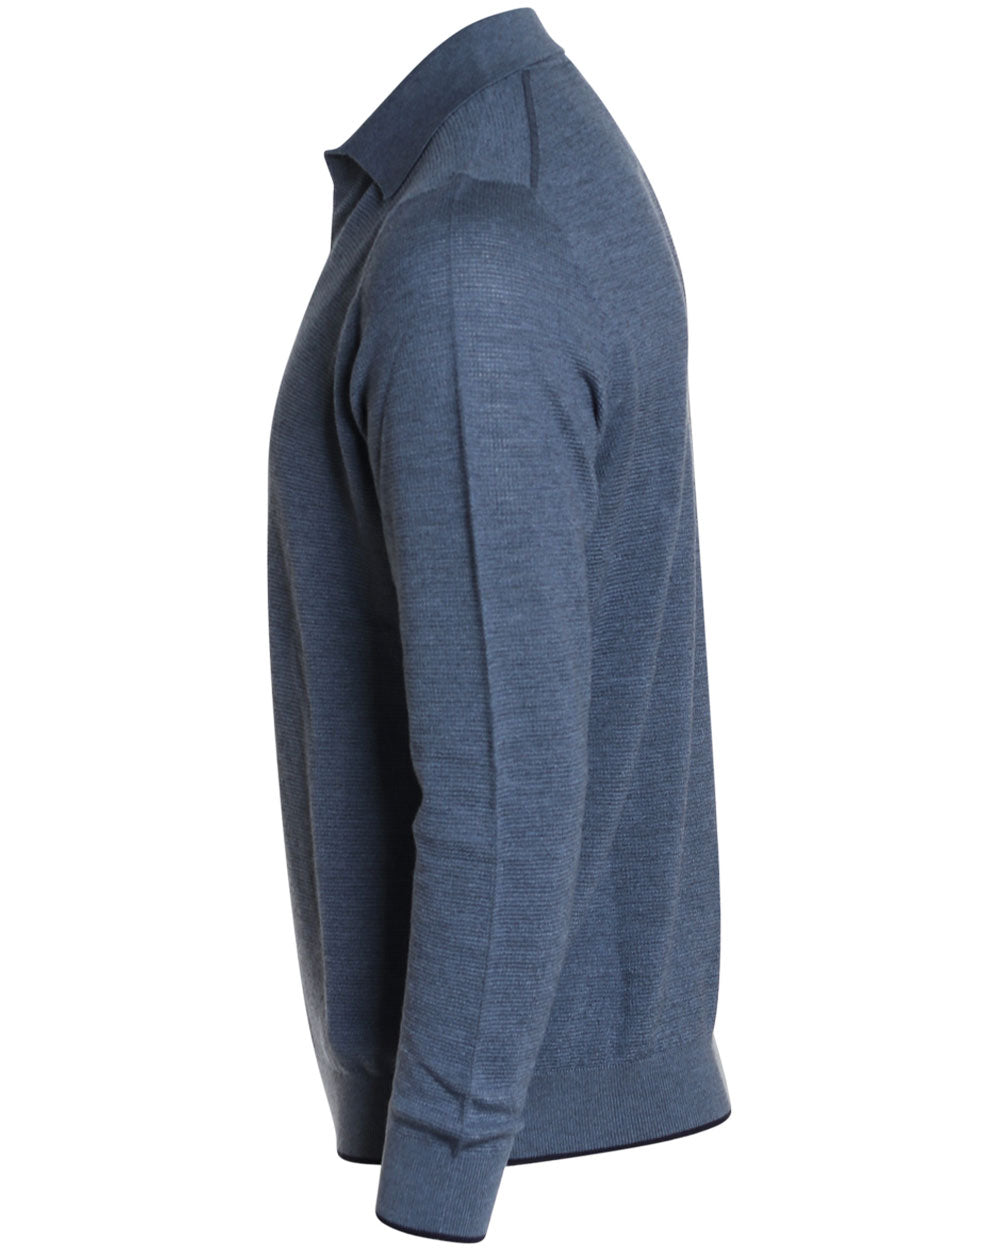 Blue Cashmere Blend Textured Long Sleeve Polo